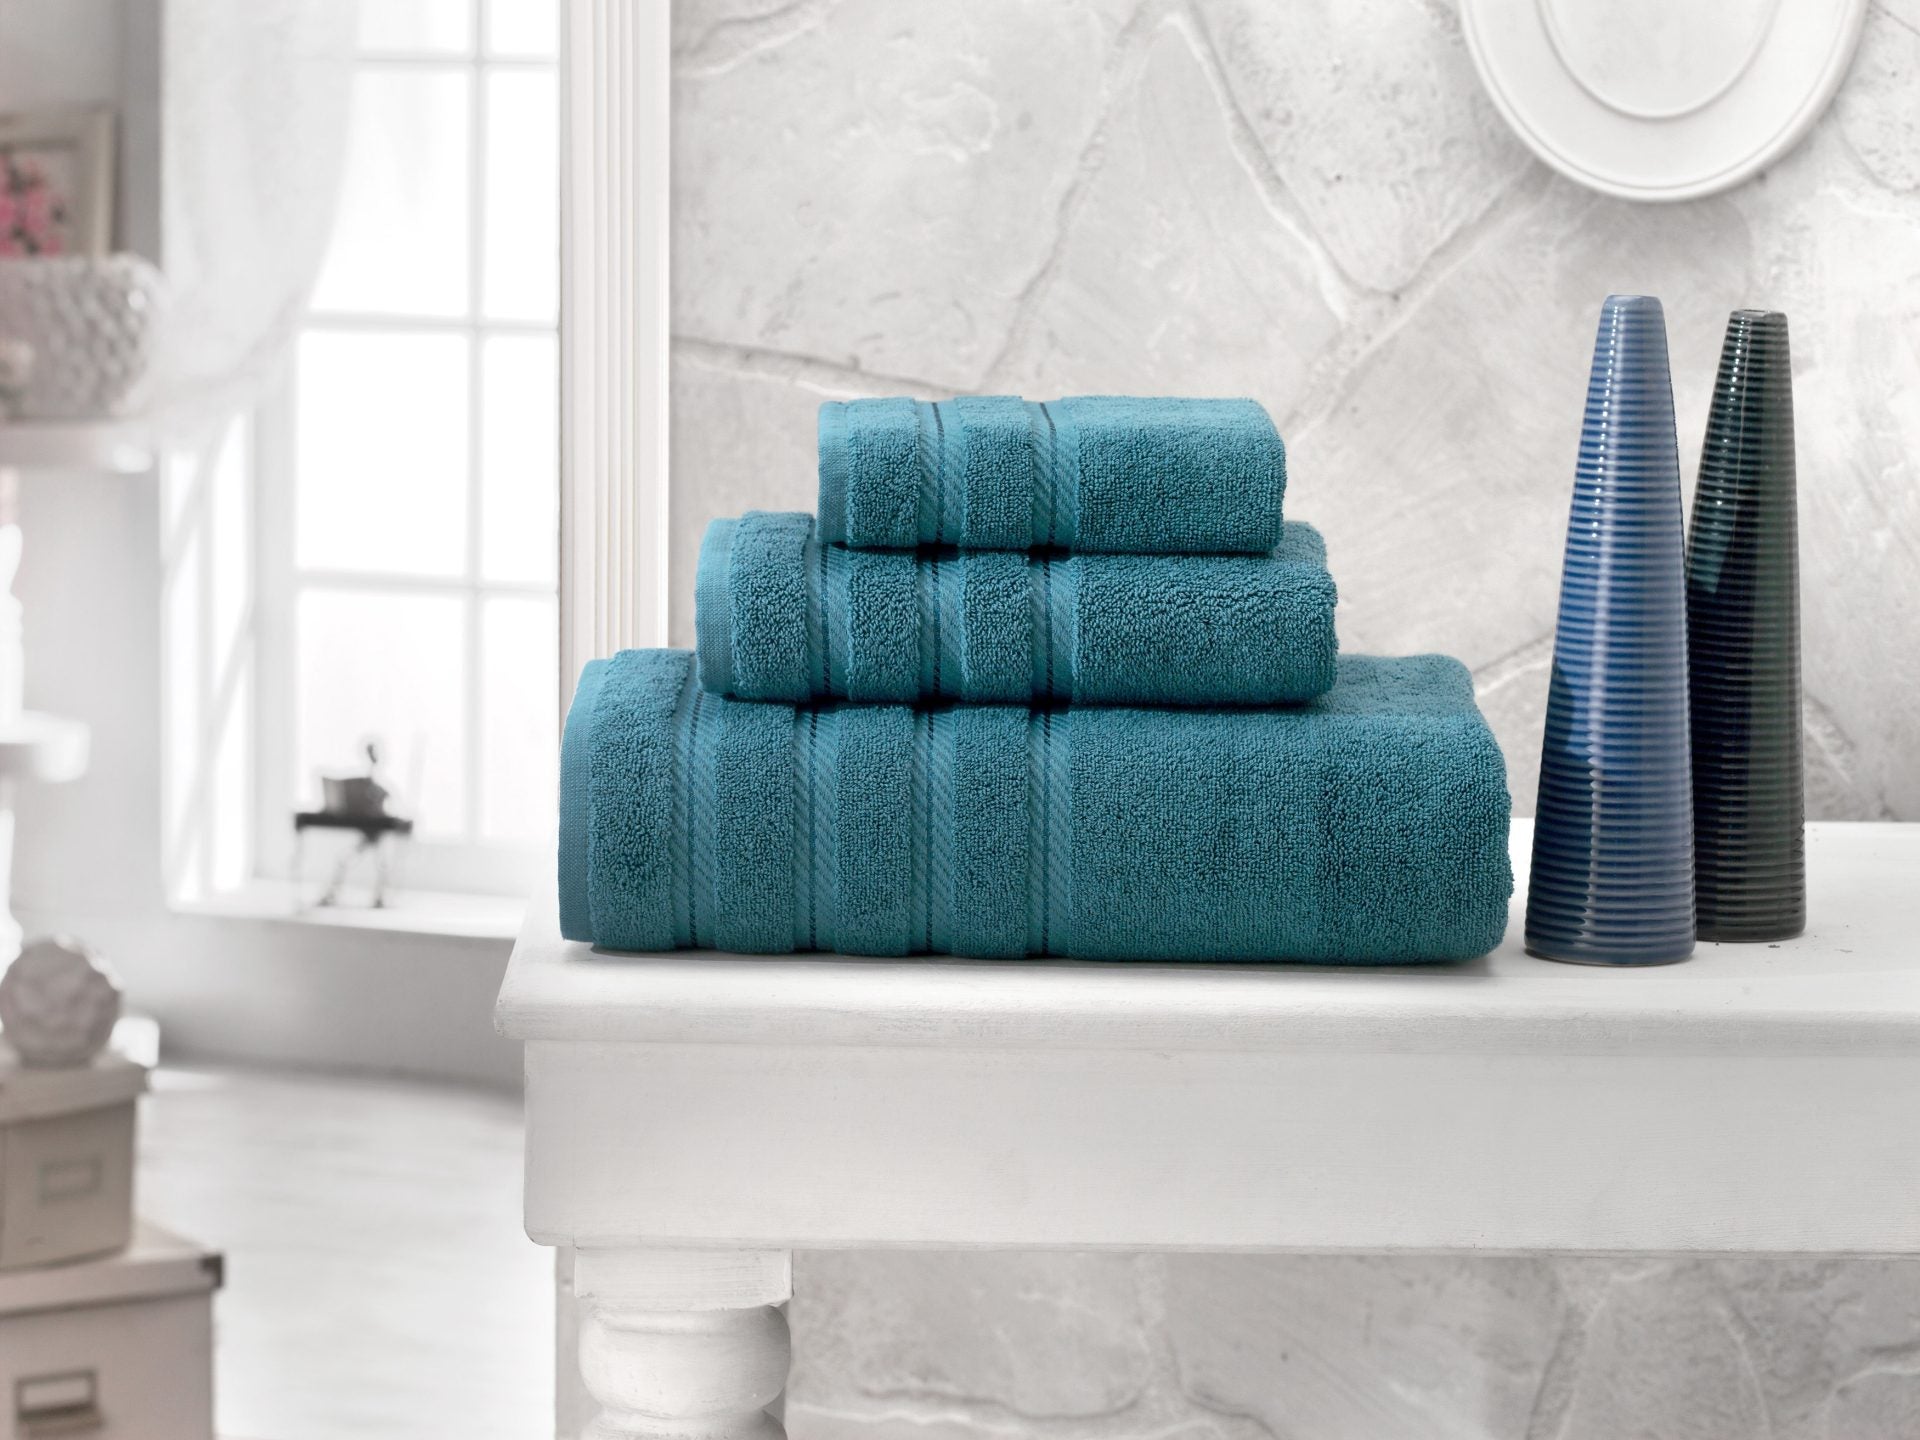 Introducing Classic Turkish towels ™ – the soft, luxurious towel you’ll love to step out of the shower and into. Made from organic Turkish cotton, Classic Turkish towels is thick and plush – perfect for a blissful bath. With long loops that are absorbent and quick to dry. 